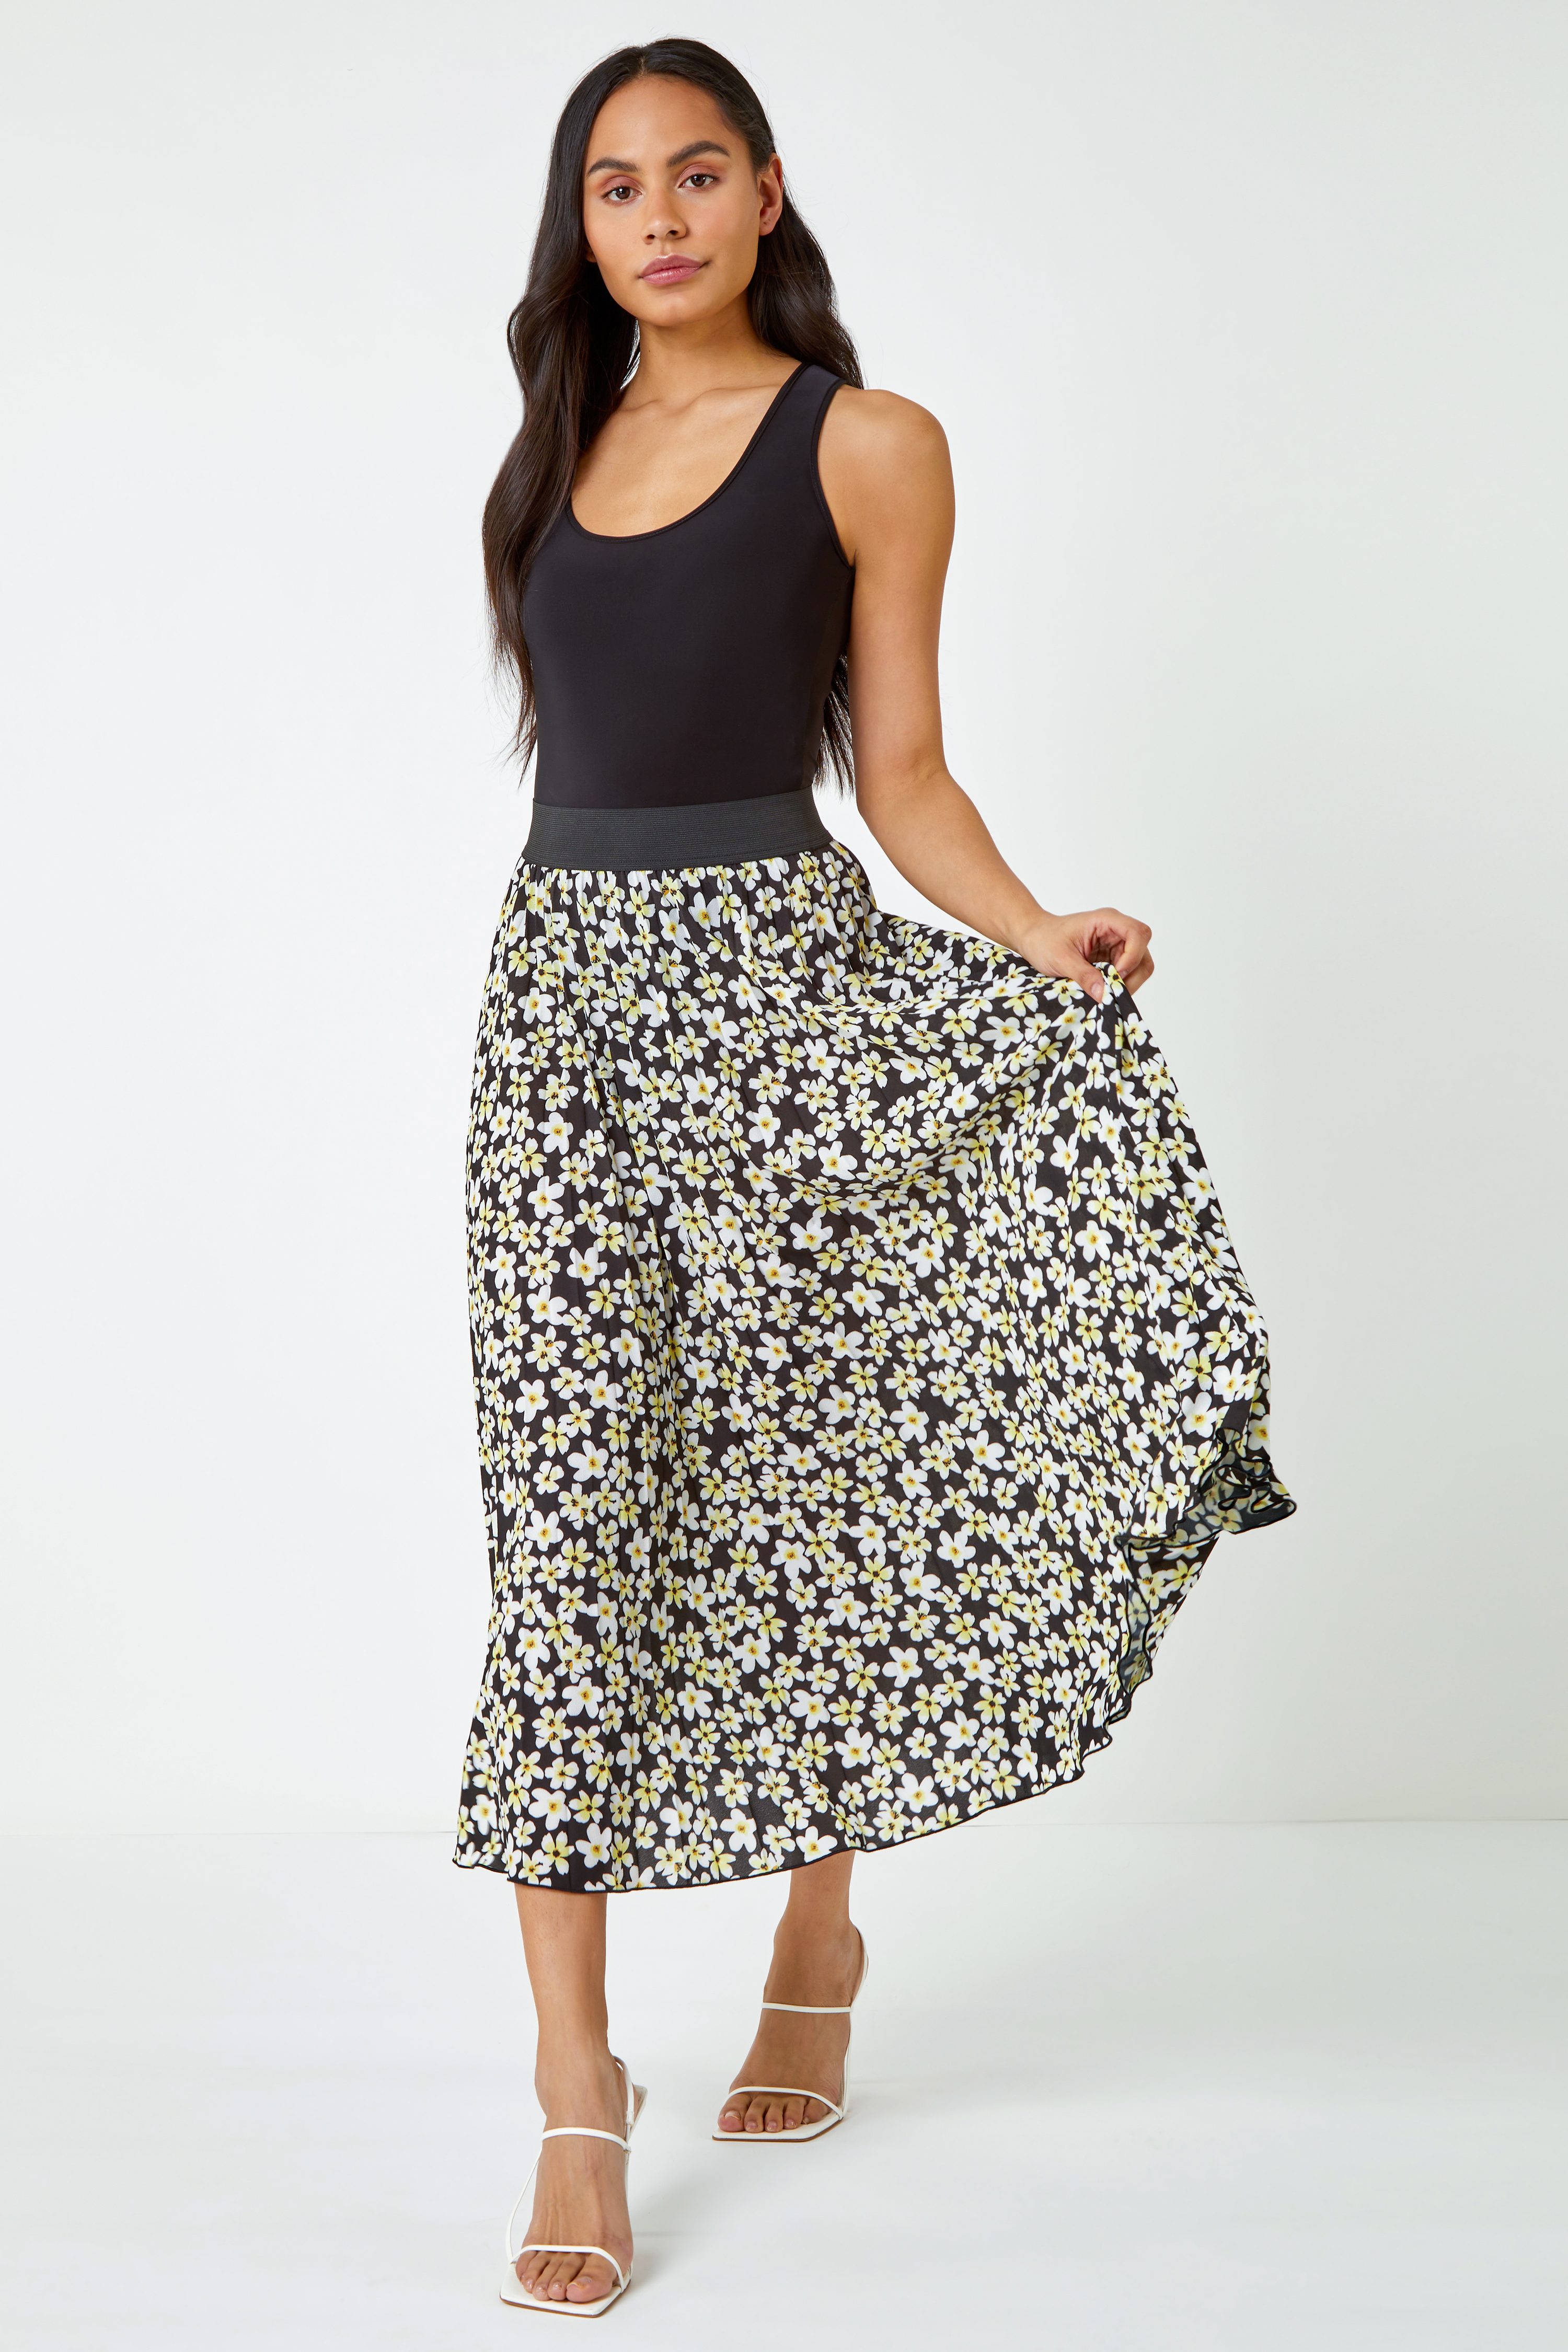 Black Daisy Floral Print Pleated Skirt, Image 4 of 5